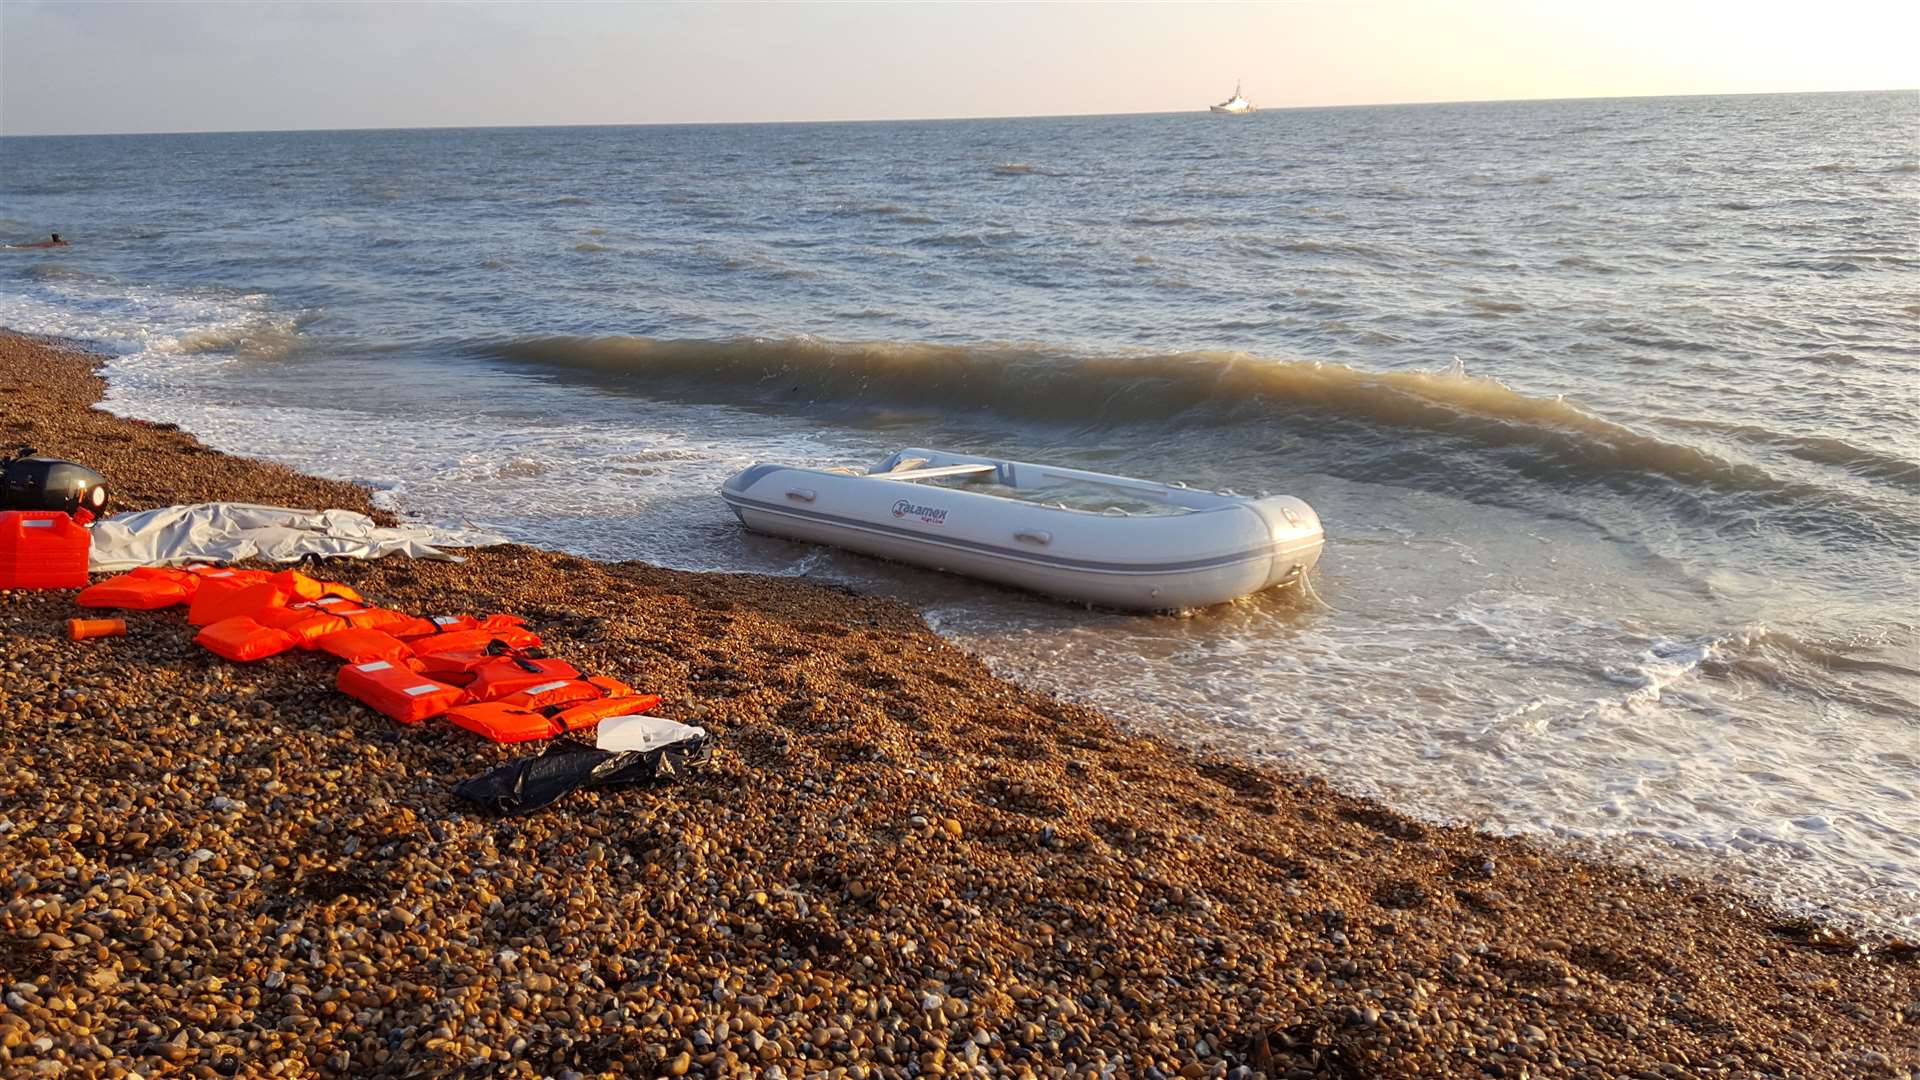 An abandoned dinghy and lifejackets were found at Kingsdown during a previous incident in January